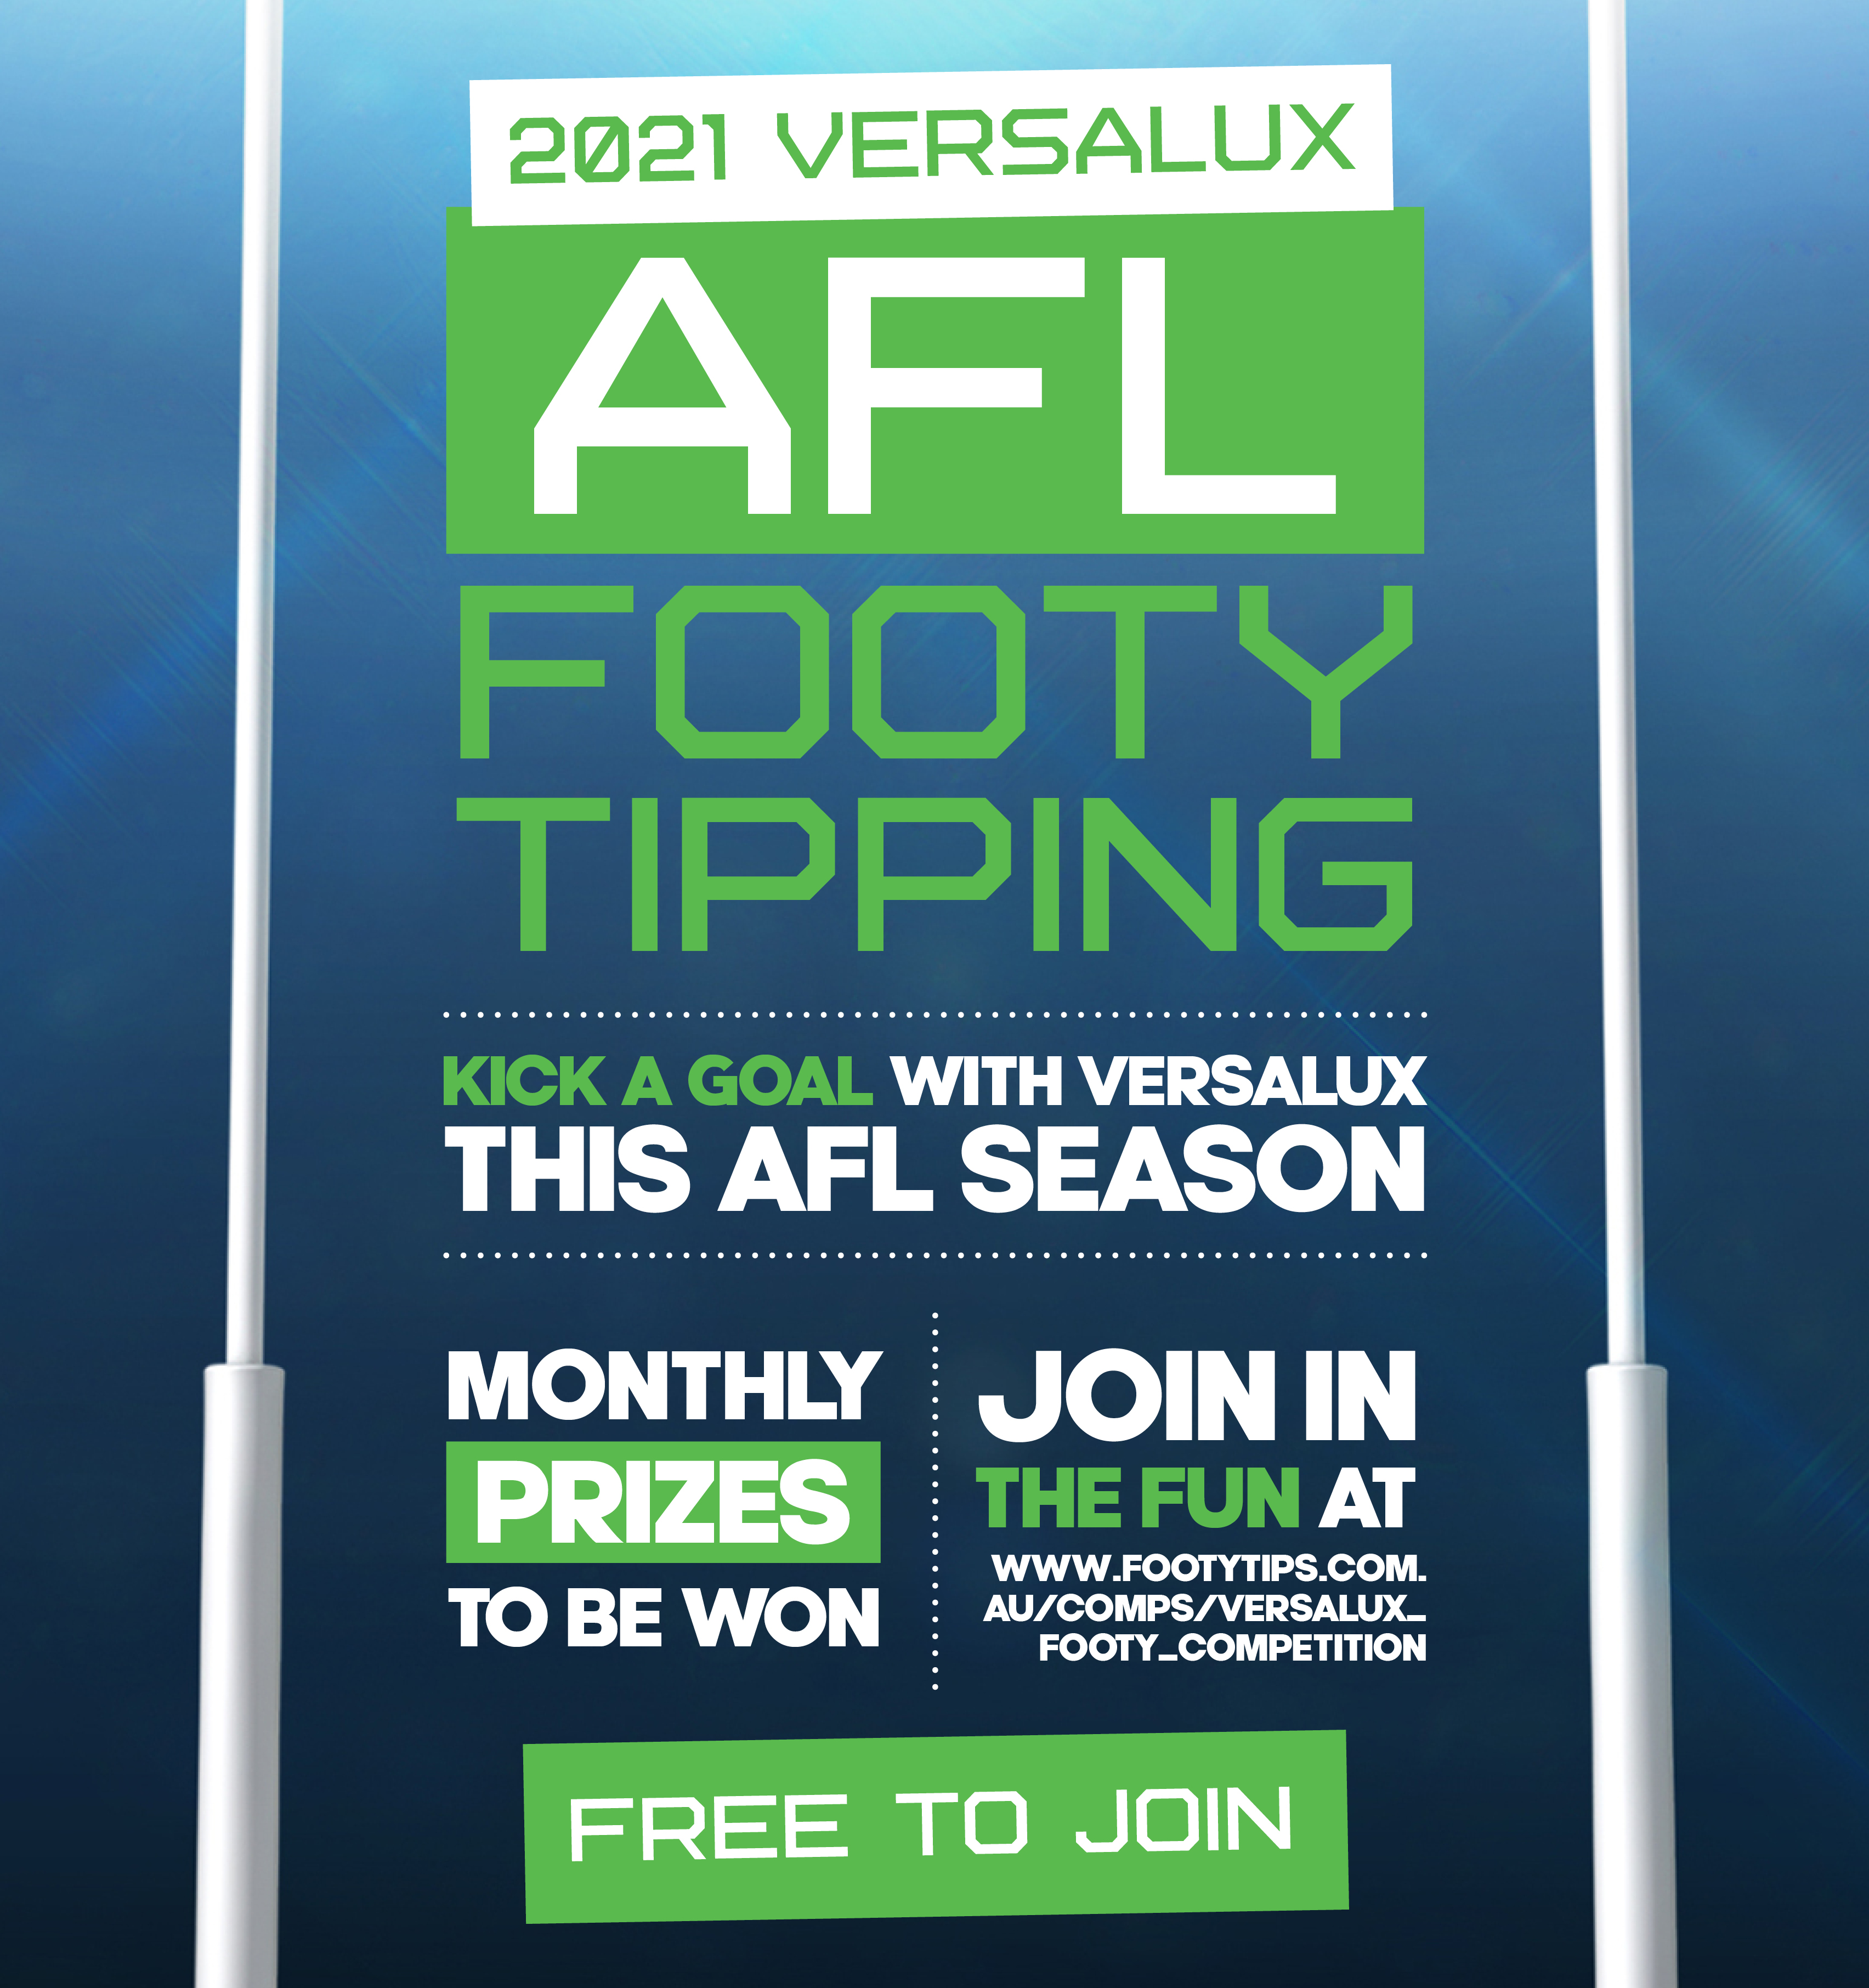 2021 Versalux Footy tipping image